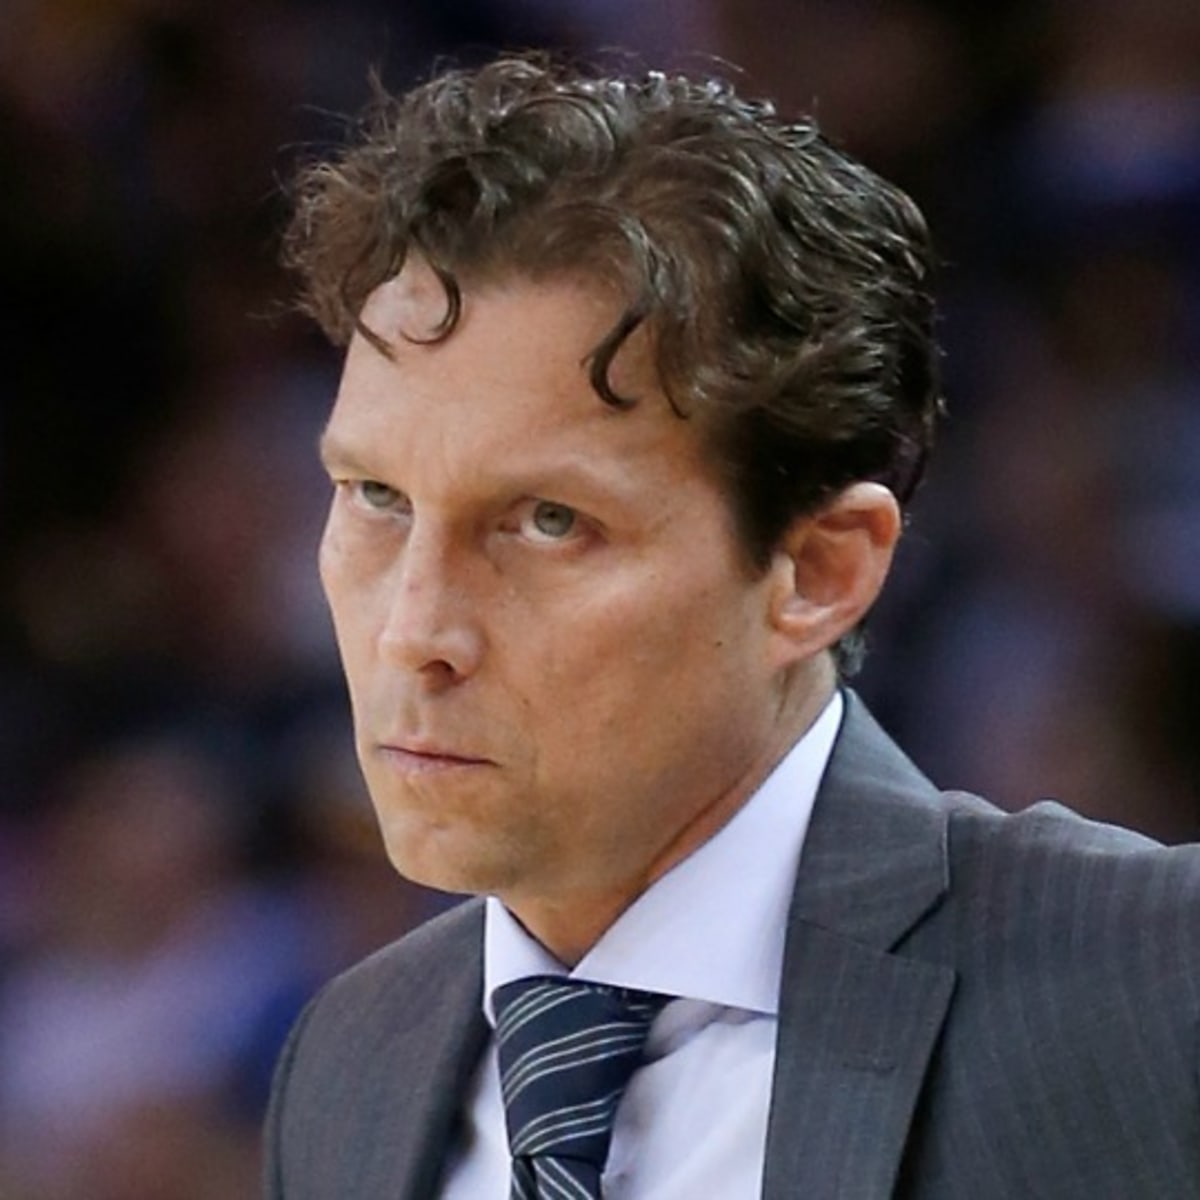 Utah Jazz coach Quin Snyder stared at players for entire timeout - Sports  Illustrated